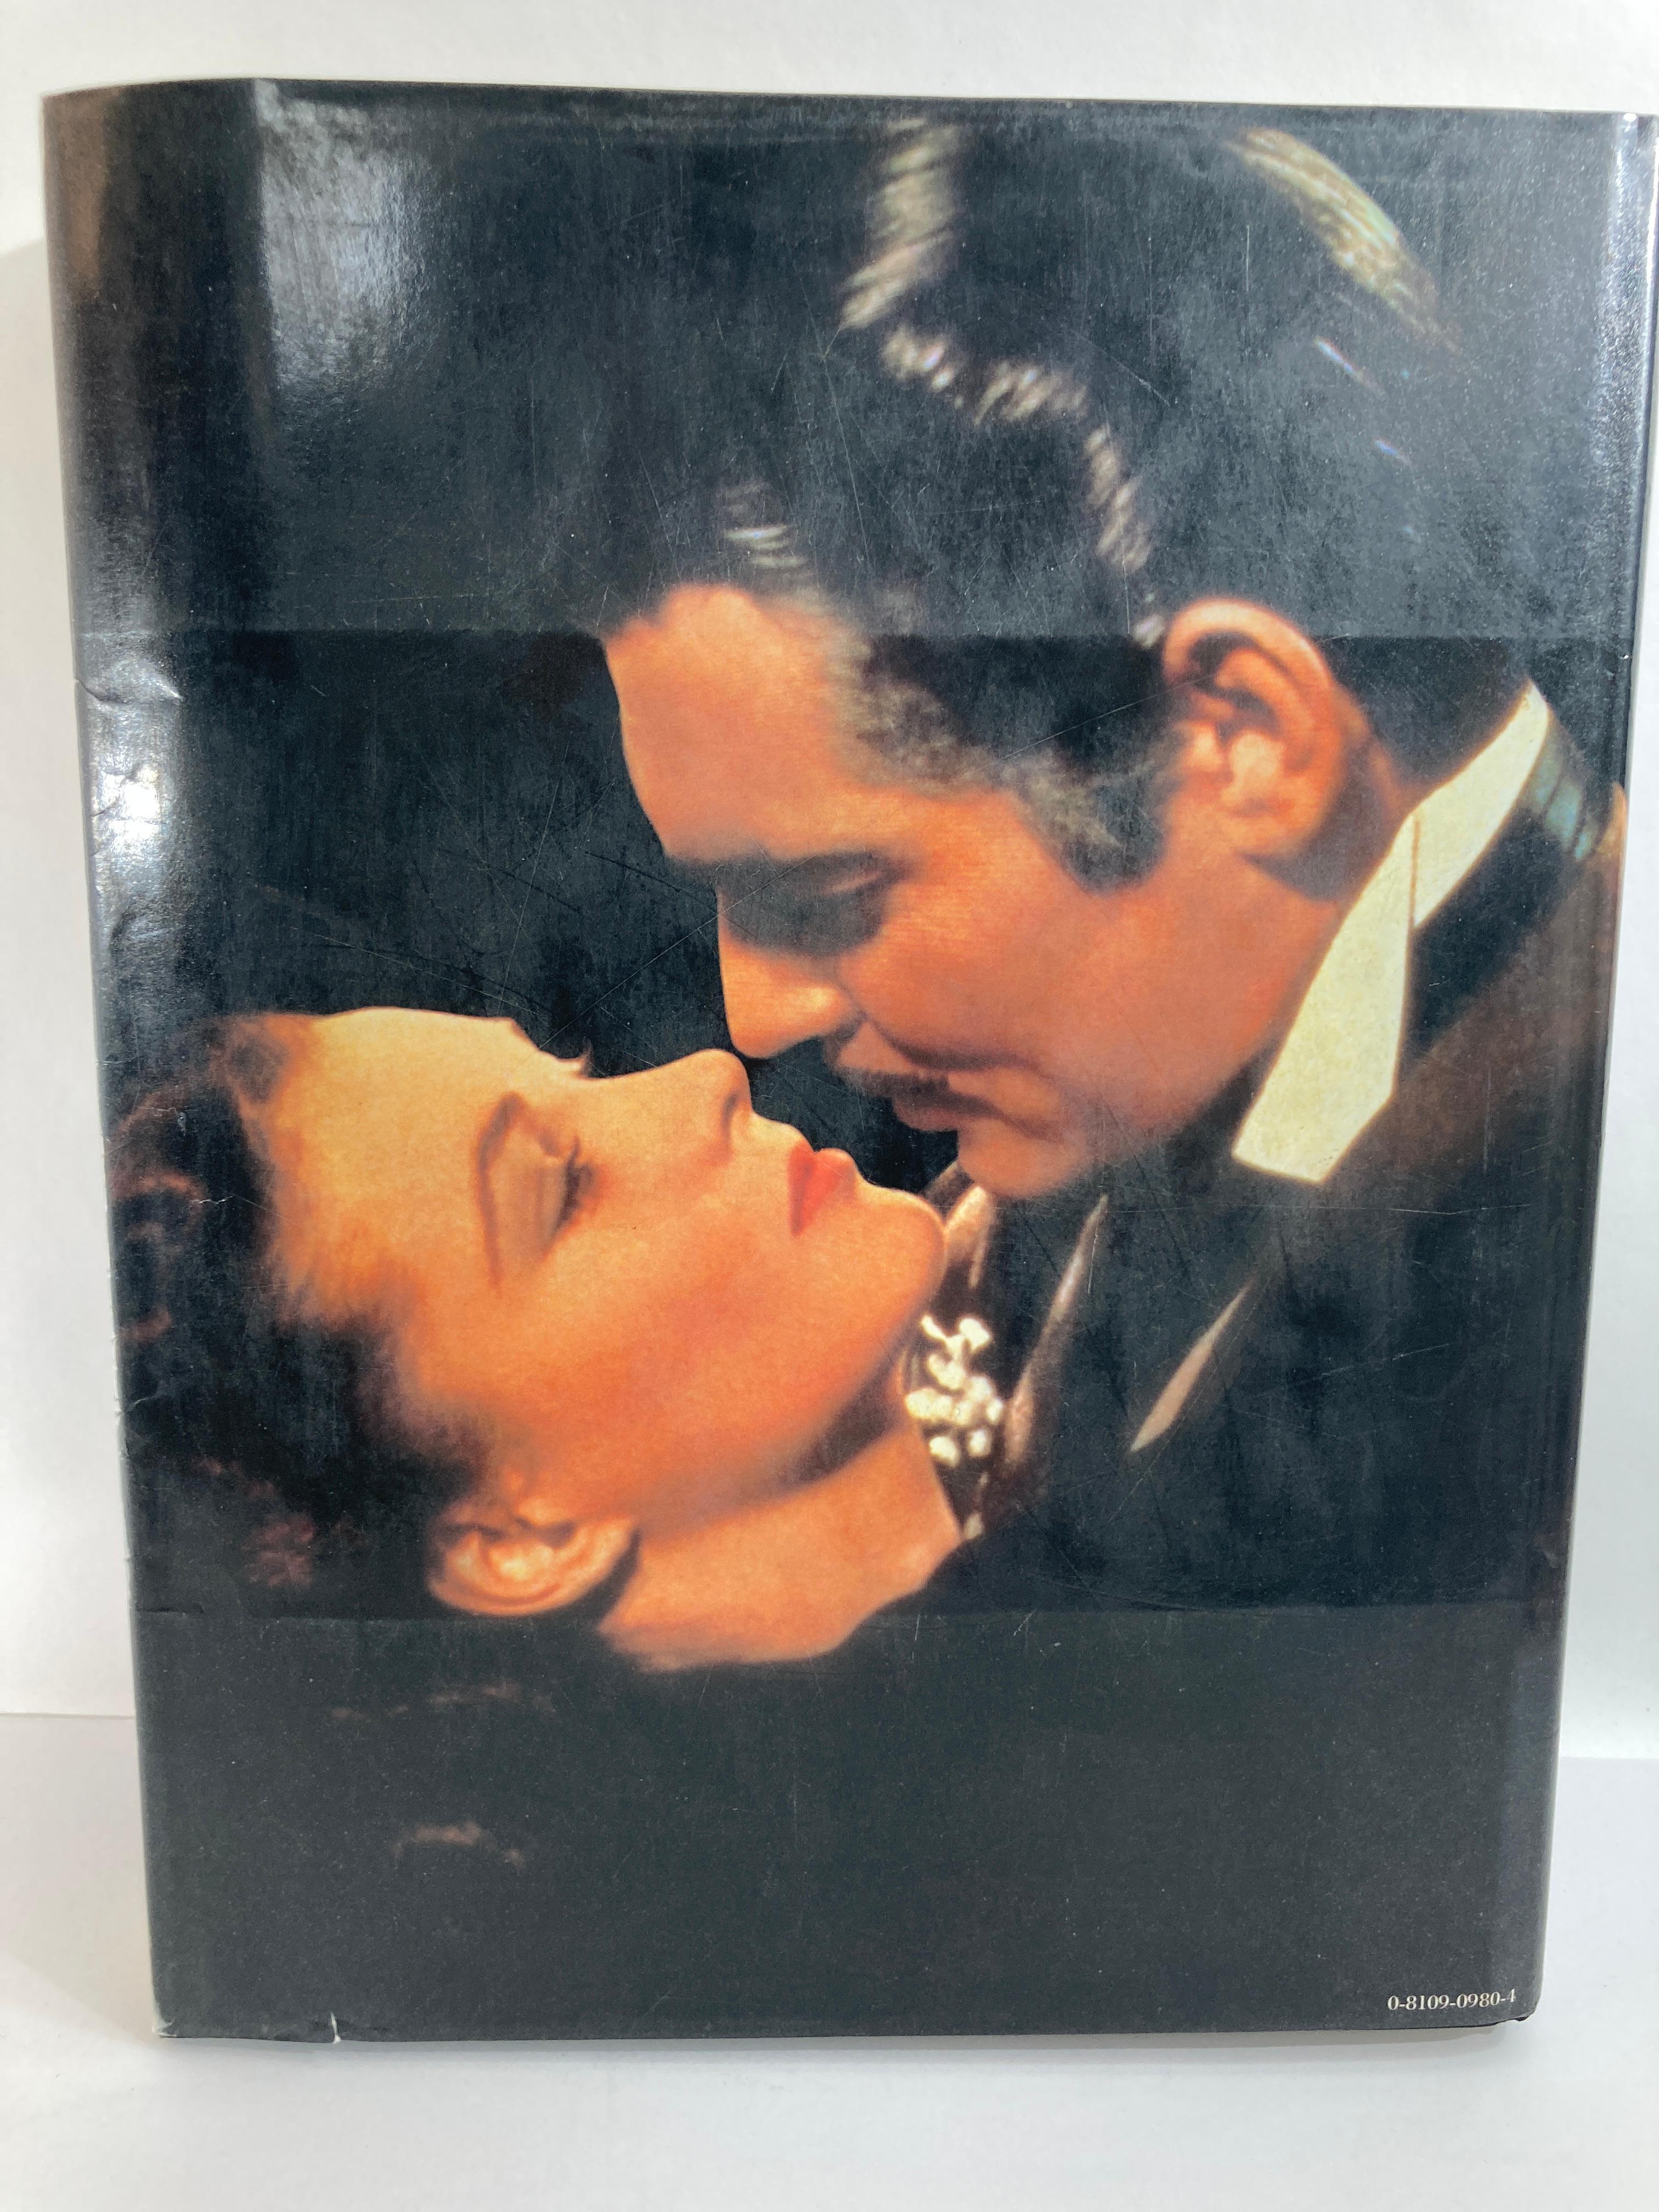 Great Hollywood Movies by Ted Sennett Hardcover Book 1st Ed. 1983 2